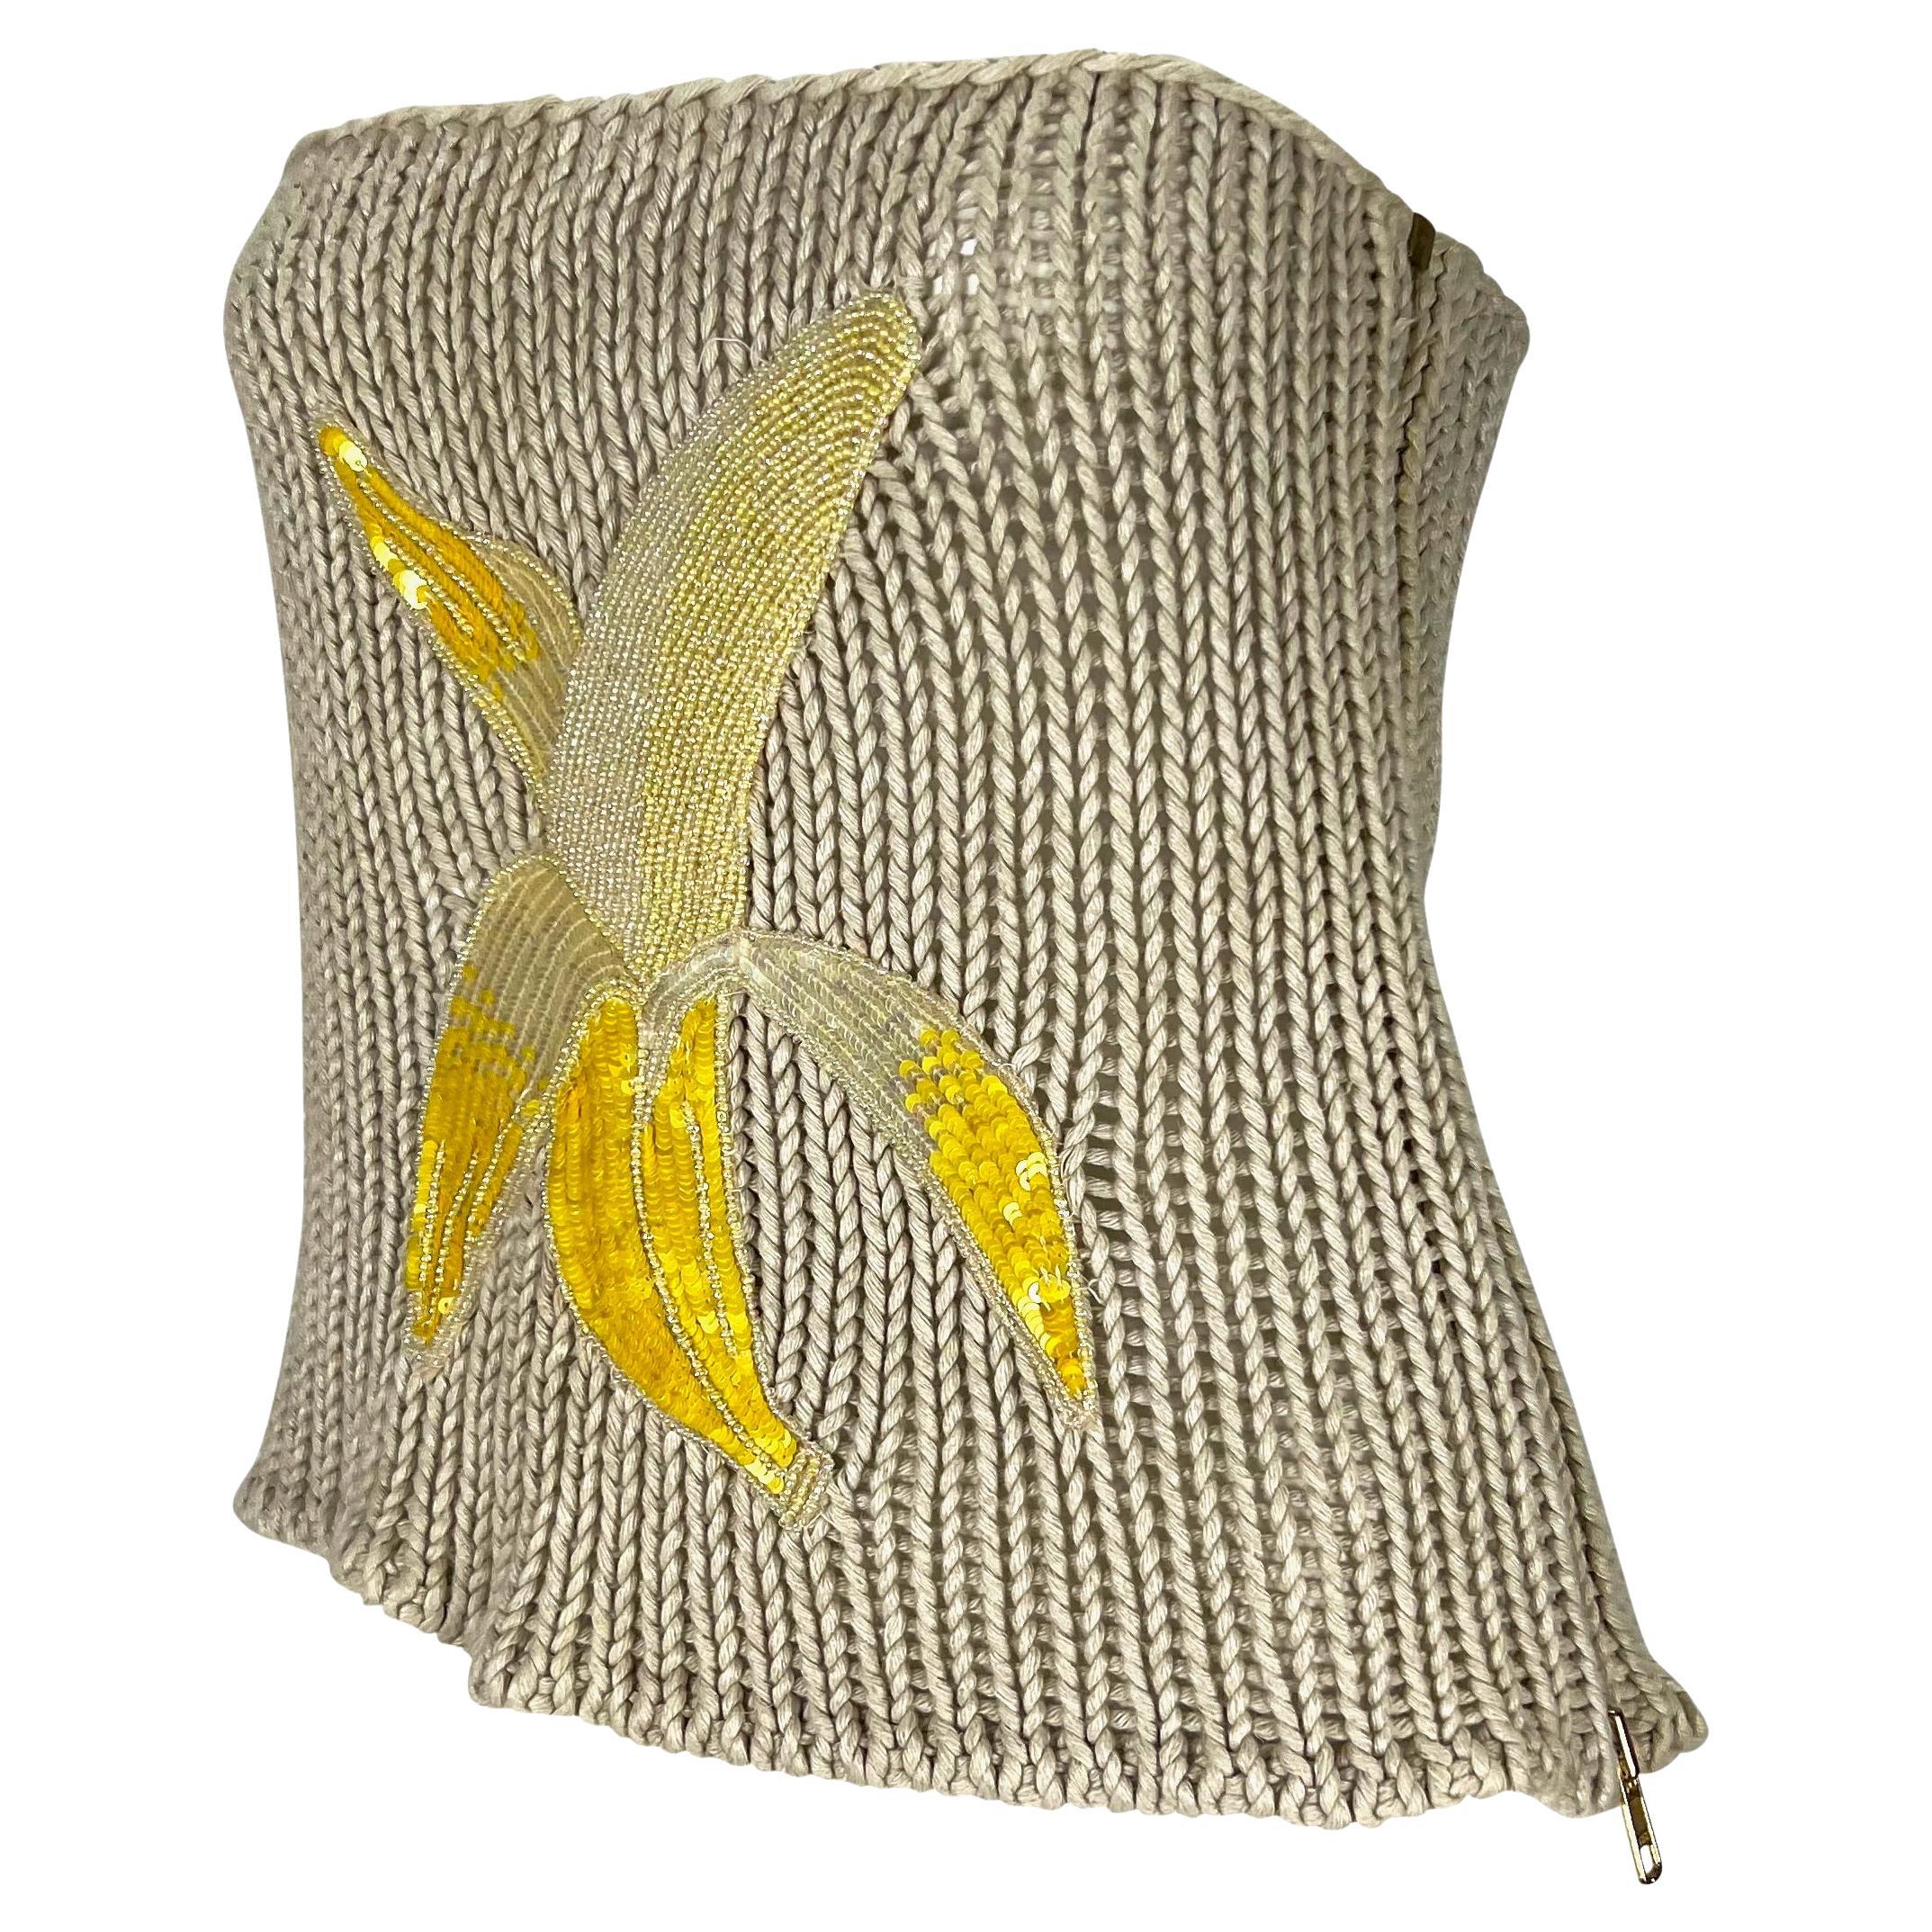 Presenting a fantastic beige knit Chloé strapless top, designed by Stella McCartney. From the Spring/Summer 2001 collection, this fabulous crocheted tube top boldly features a rhinestone and beaded banana at the front. Perfectly whimsical, this top